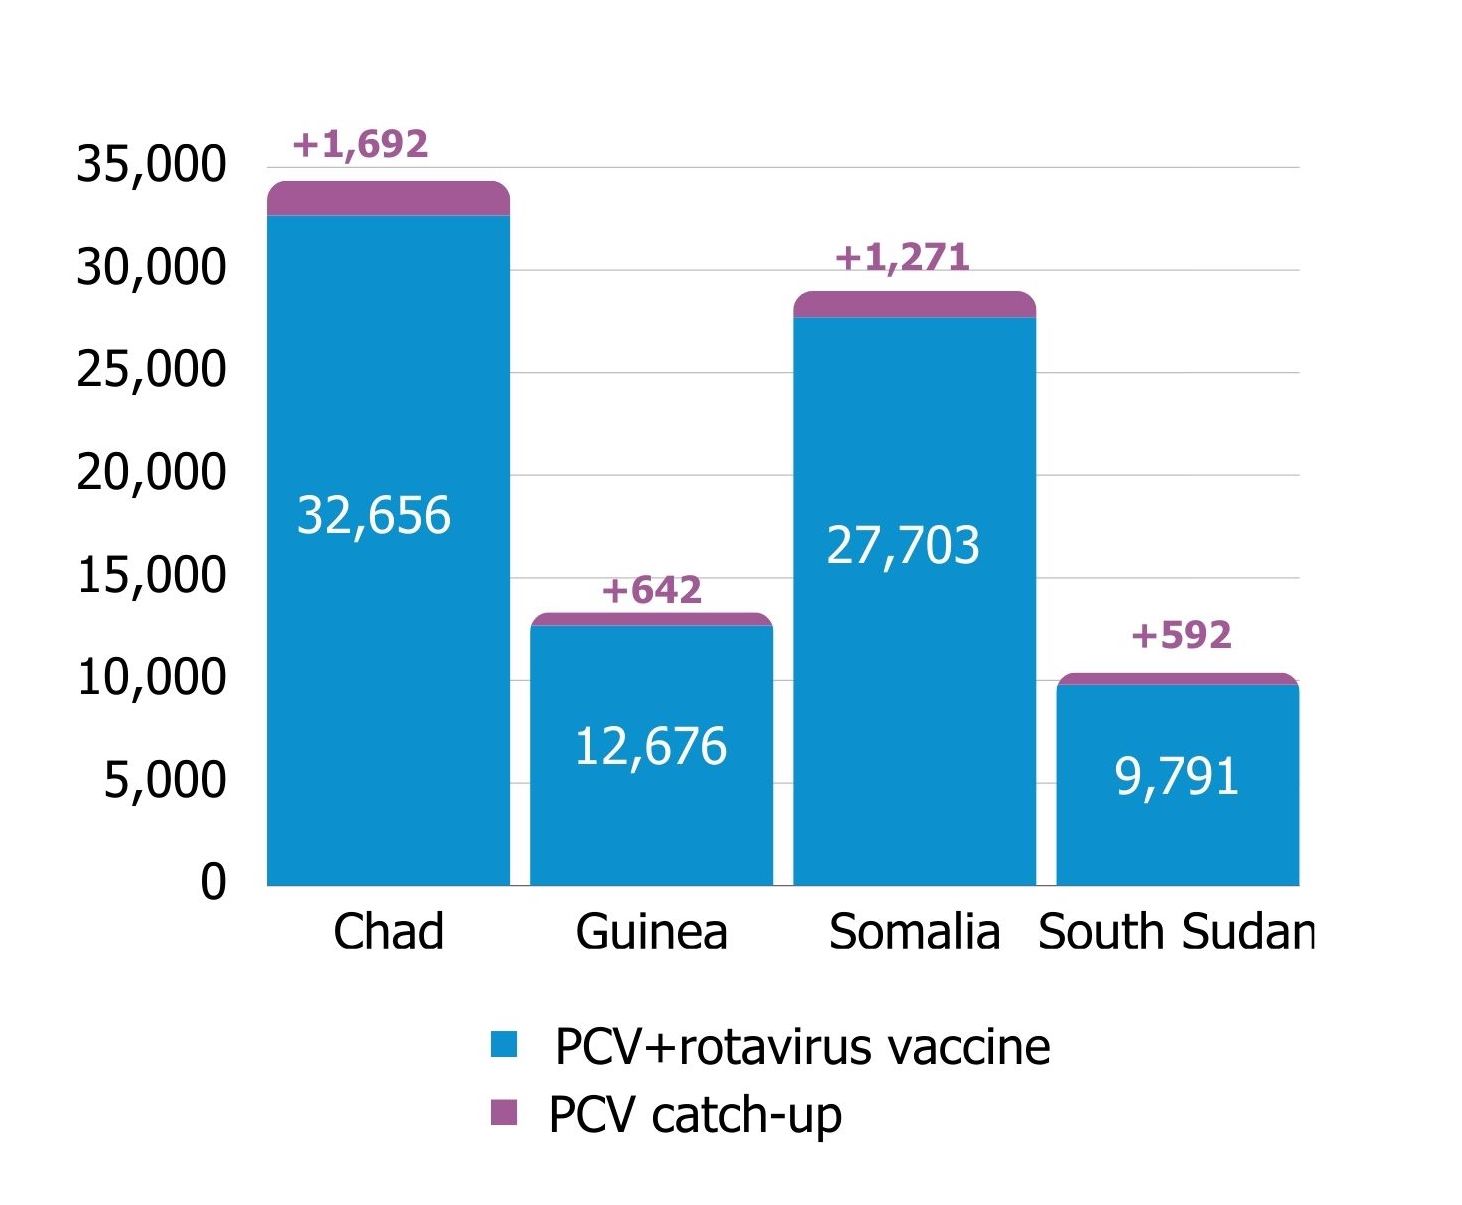 Potential lives saved of children aged 1 month to 59 months cumulatively from 2024 to 2030 with PCV + PCV catch-up + rotavirus vaccine from 2024 to 2030. Photo: John Hopkins Bloomberg School of Public Health/IVAC International Vaccine Center